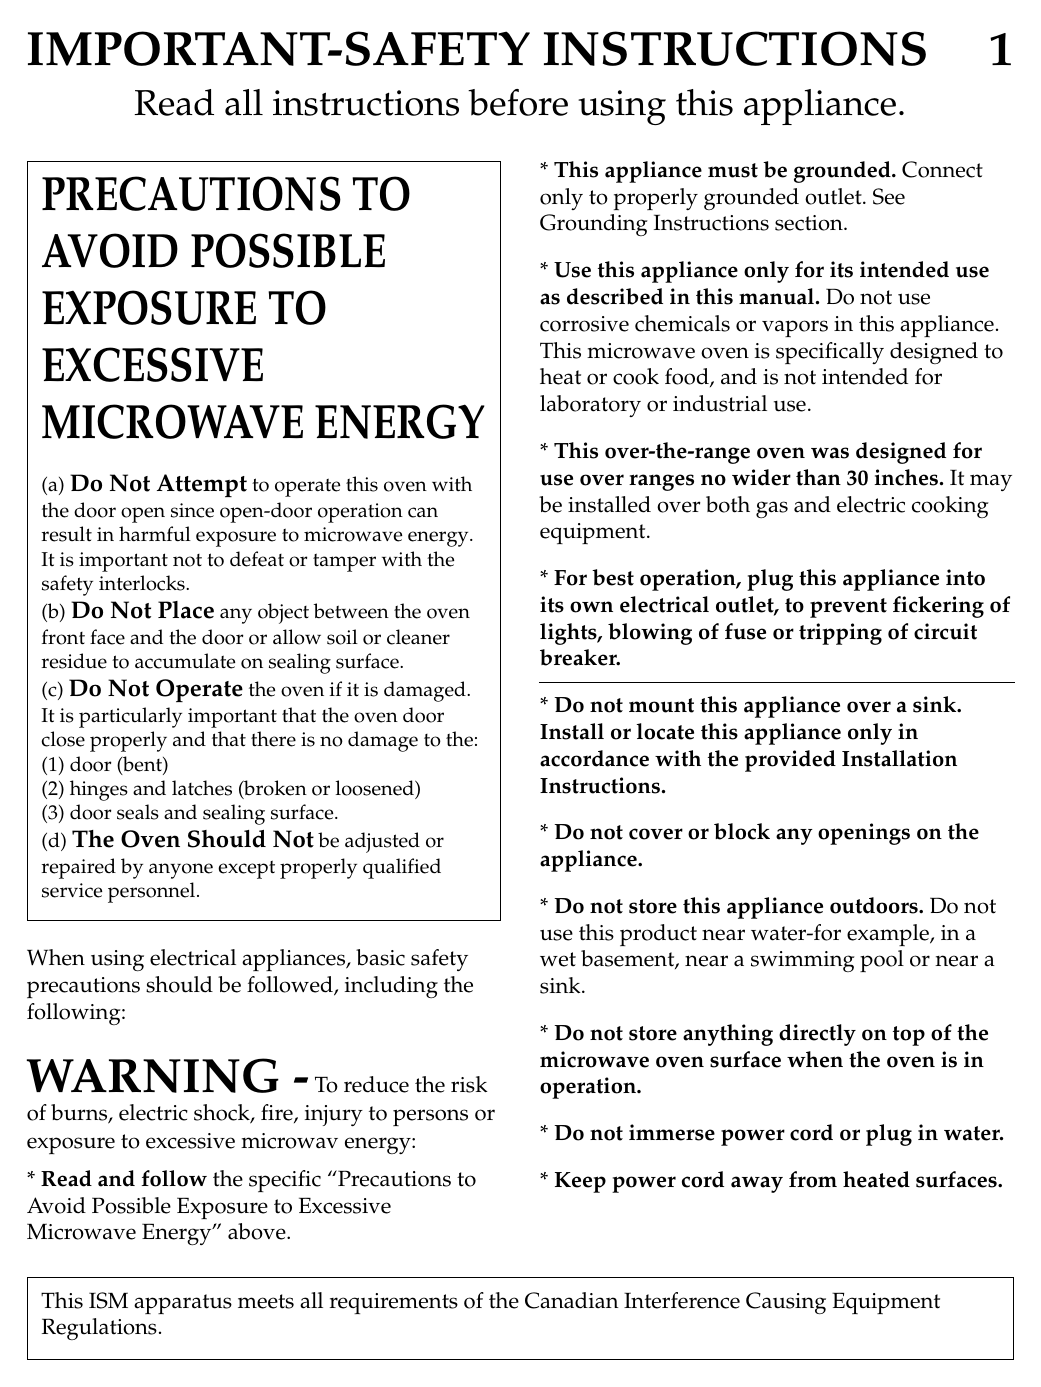 IMPORTANT-SAFETY INSTRUCTIONS 1Read all instructions before using this appliance.When using electrical appliances, basic safetyprecautions should be followed, including thefollowing:WARNING -To reduce the riskof burns, electric shock, fire, injury to persons orexposure to excessive microwav energy:* Read and follow the specific “Precautions toAvoid Possible Exposure to ExcessiveMicrowave Energy” above.* This appliance must be grounded. Connectonly to properly grounded outlet. SeeGrounding Instructions section.* Use this appliance only for its intended useas described in this manual. Do not usecorrosive chemicals or vapors in this appliance.This microwave oven is specifically designed toheat or cook food, and is not intended forlaboratory or industrial use.* This over-the-range oven was designed foruse over ranges no wider than 30 inches. It maybe installed over both gas and electric cookingequipment.* For best operation, plug this appliance intoits own electrical outlet, to prevent fickering oflights, blowing of fuse or tripping of circuitbreaker.* Do not mount this appliance over a sink.Install or locate this appliance only inaccordance with the provided InstallationInstructions.* Do not cover or block any openings on theappliance.* Do not store this appliance outdoors. Do notuse this product near water-for example, in awet basement, near a swimming pool or near asink.* Do not store anything directly on top of themicrowave oven surface when the oven is inoperation.* Do not immerse power cord or plug in water.* Keep power cord away from heated surfaces.PRECAUTIONS TOAVOID POSSIBLEEXPOSURE TOEXCESSIVEMICROWAVE ENERGY(a) Do Not Attempt to operate this oven withthe door open since open-door operation canresult in harmful exposure to microwave energy.It is important not to defeat or tamper with thesafety interlocks.(b) Do Not Place any object between the ovenfront face and the door or allow soil or cleanerresidue to accumulate on sealing surface.(c) Do Not Operate the oven if it is damaged.It is particularly important that the oven doorclose properly and that there is no damage to the:(1) door (bent)(2) hinges and latches (broken or loosened)(3) door seals and sealing surface.(d) The Oven Should Not be adjusted orrepaired by anyone except properly qualifiedservice personnel.This ISM apparatus meets all requirements of the Canadian Interference Causing EquipmentRegulations.